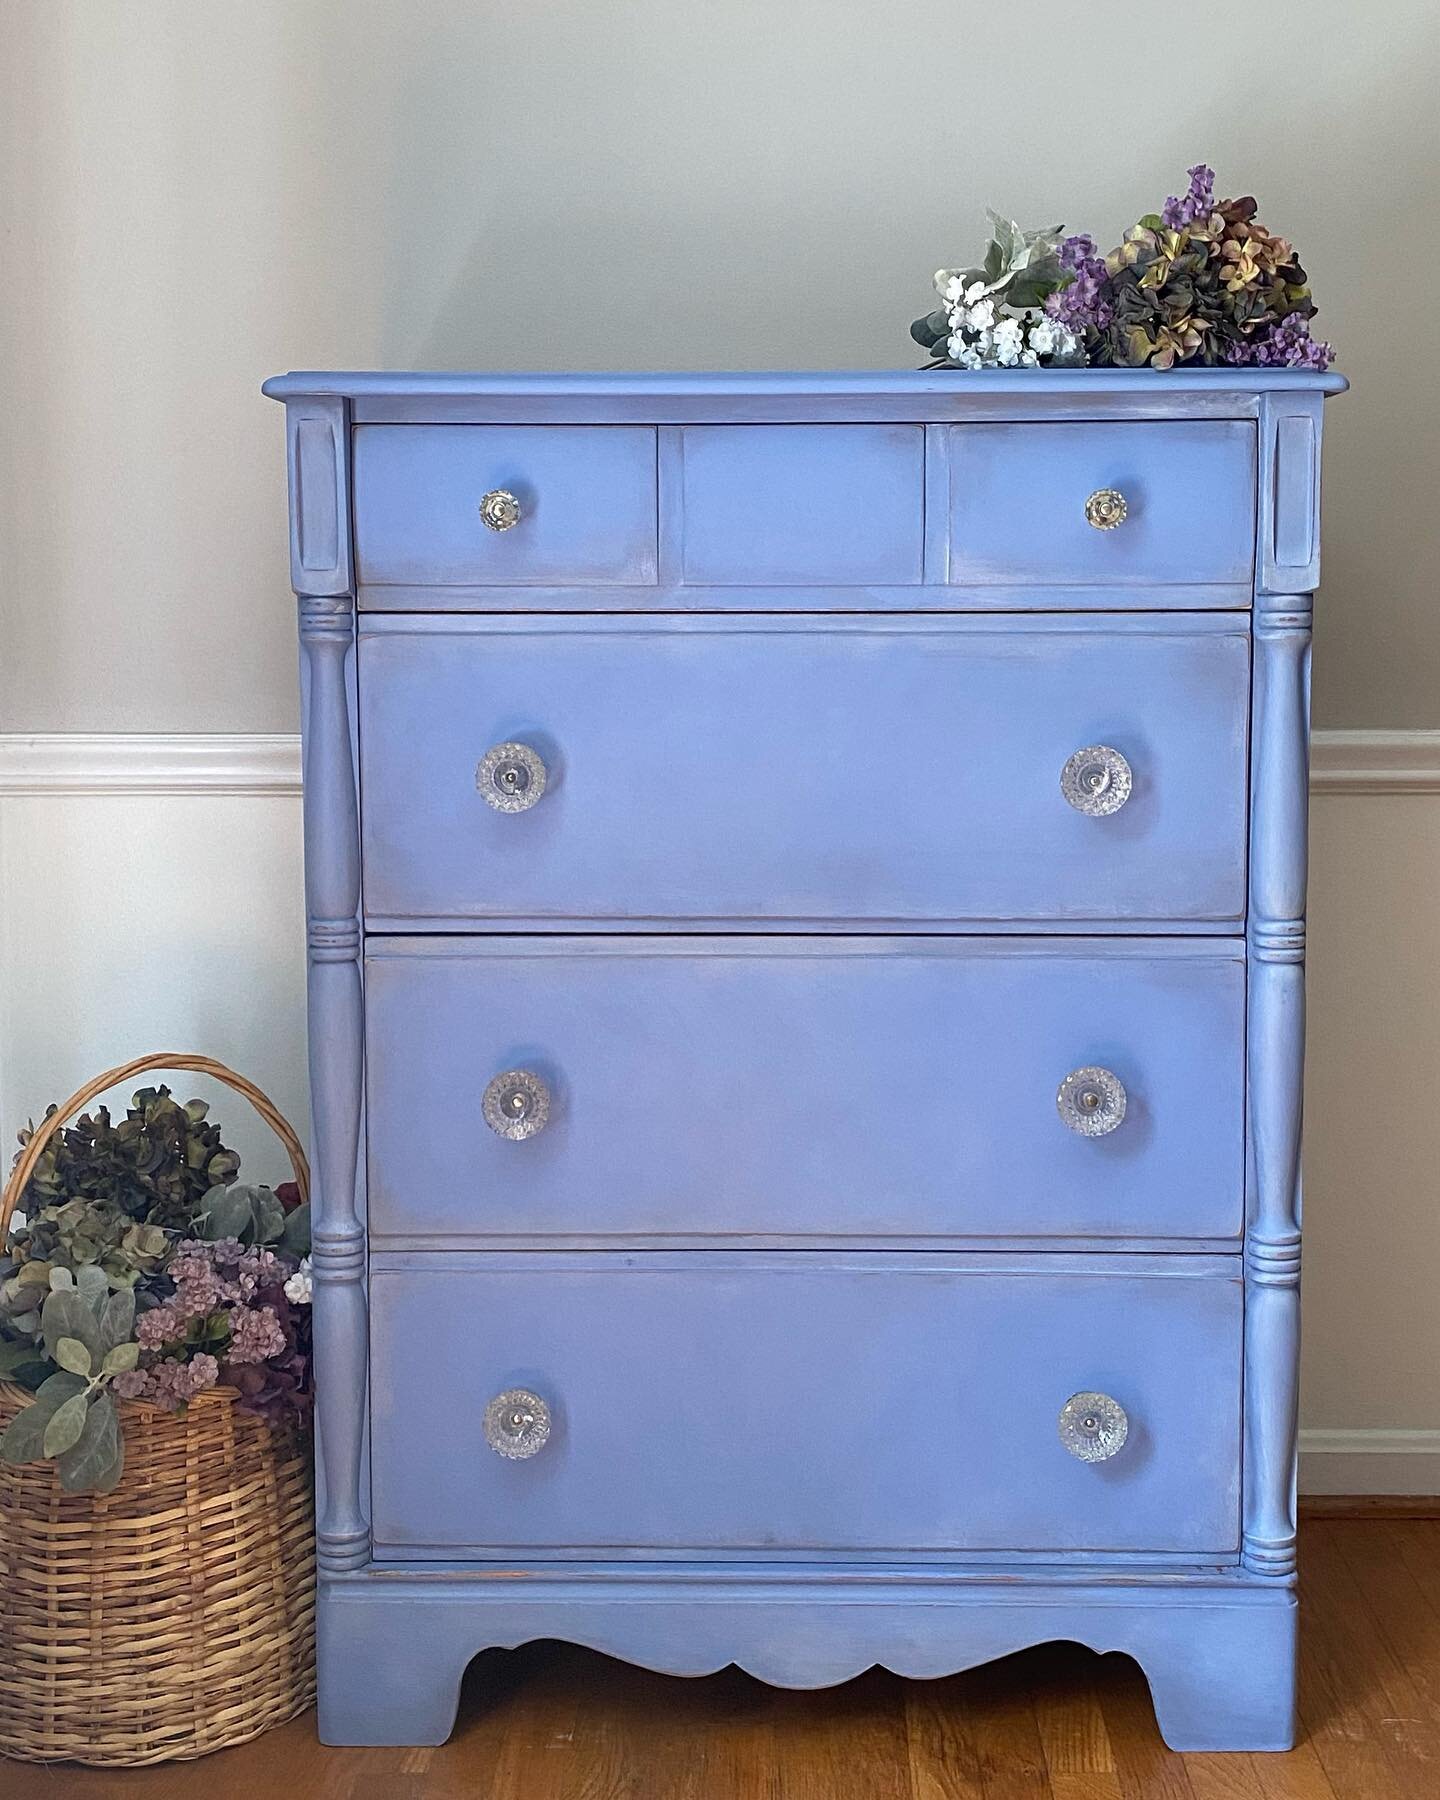 Another makeover in the books! This sweet chest of drawers was reimagined in @dixiebelle paints and waxes for a totally new look!  Swipe to see the before! #dixiebellepaint #blueberry #bdwclear #bdwbrown #furnituremakeover #furnitureflip #furniturede